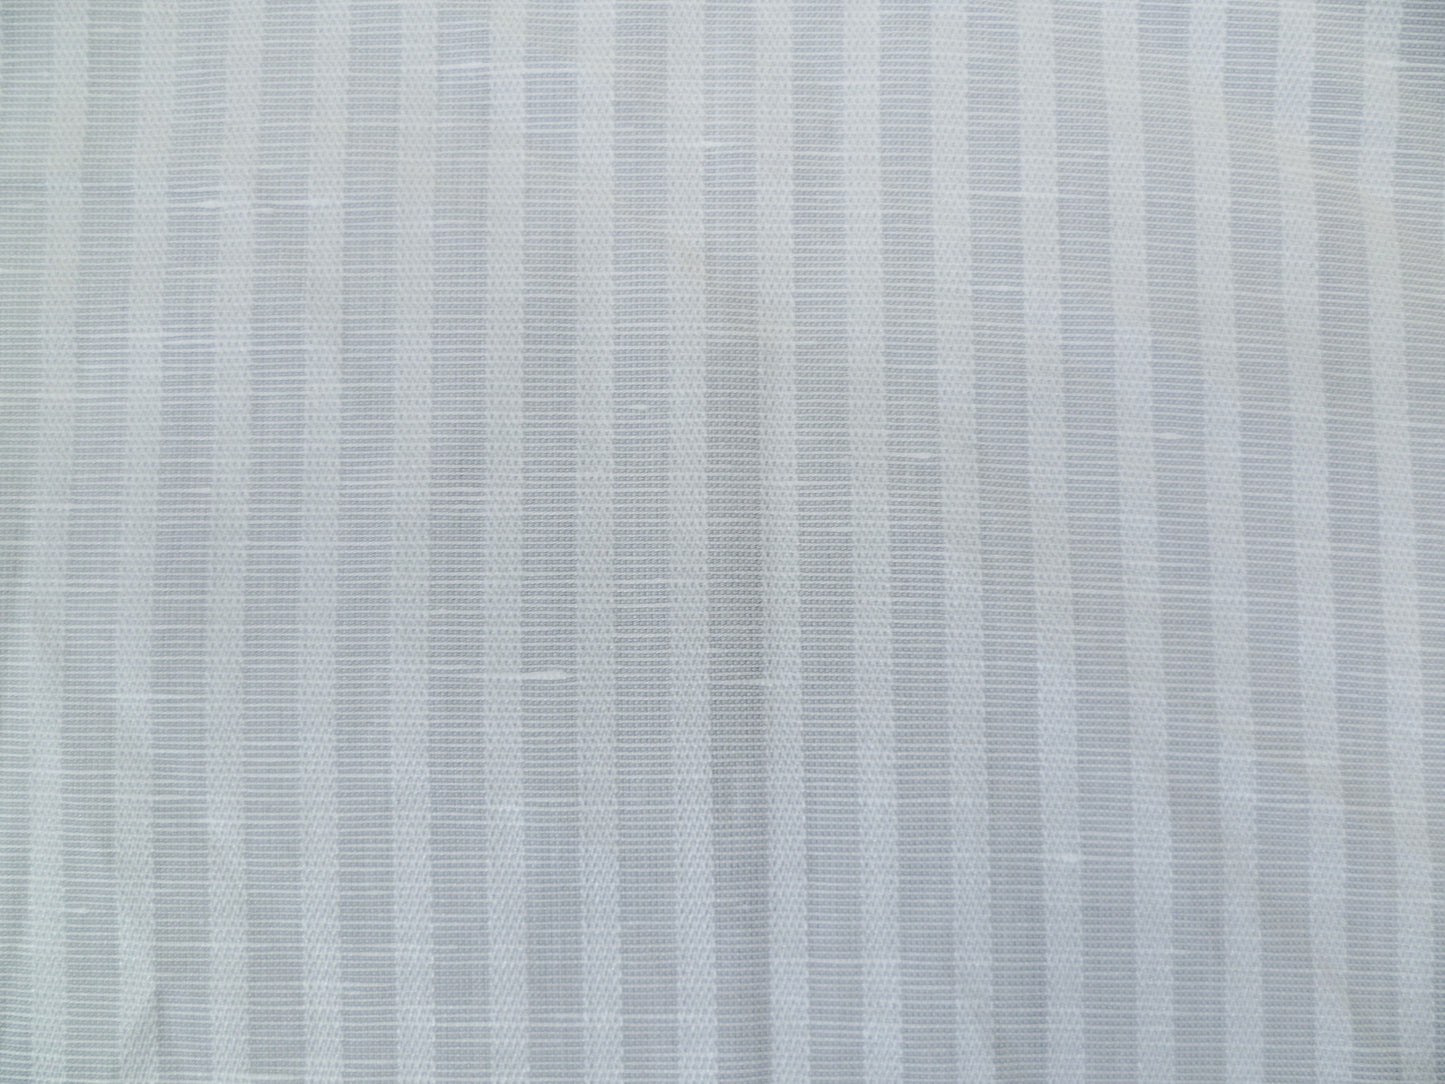 Soft Grey and White Striped Cotton-Linen